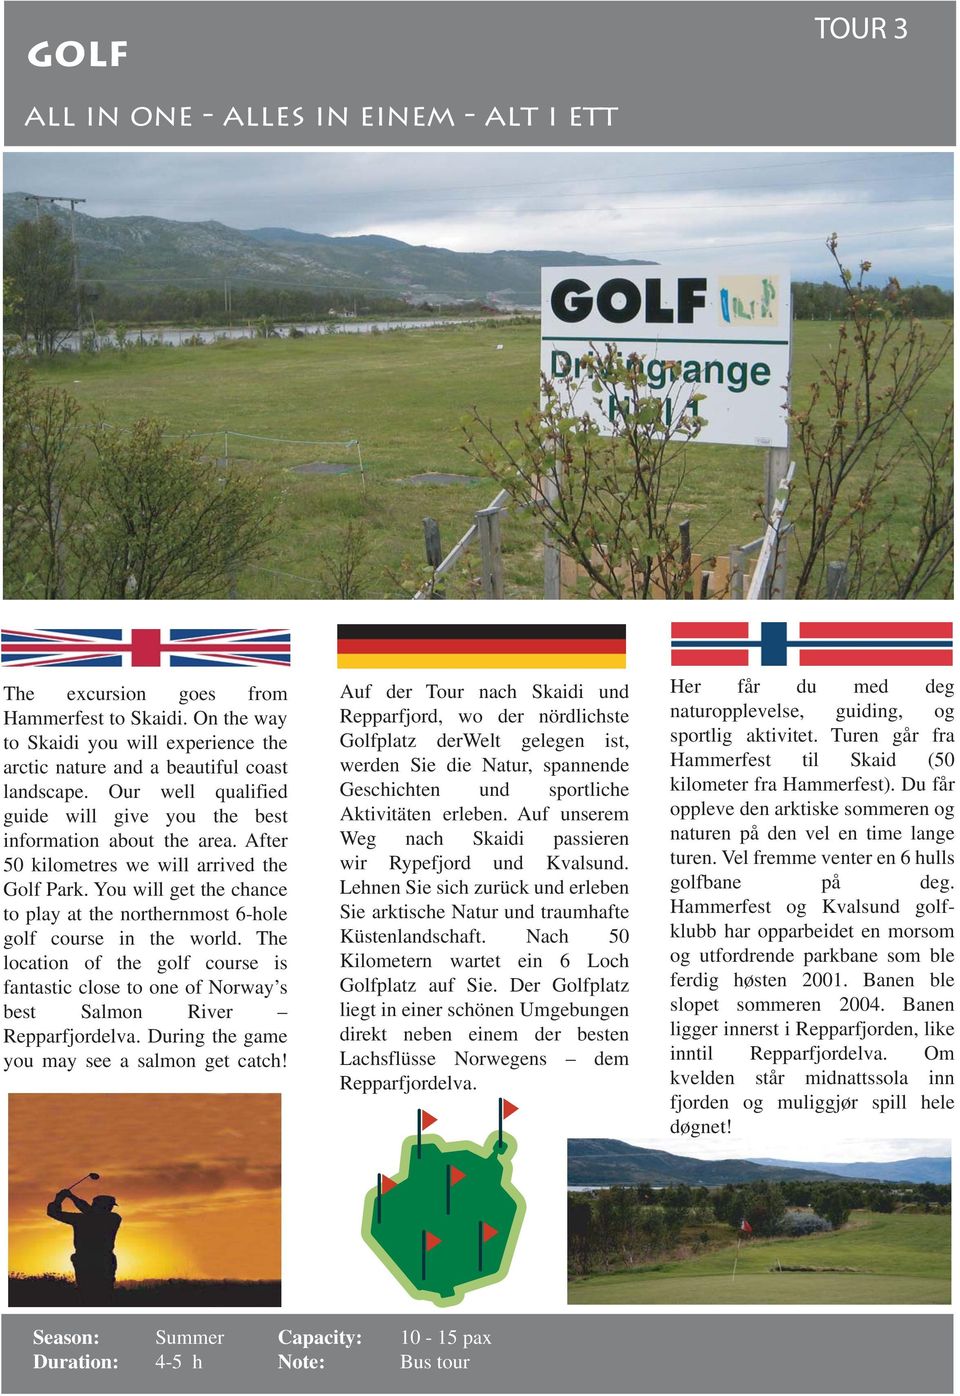 You will get the chance to play at the northernmost 6-hole golf course in the world. The location of the golf course is fantastic close to one of Norway s best Salmon River Repparfjordelva.